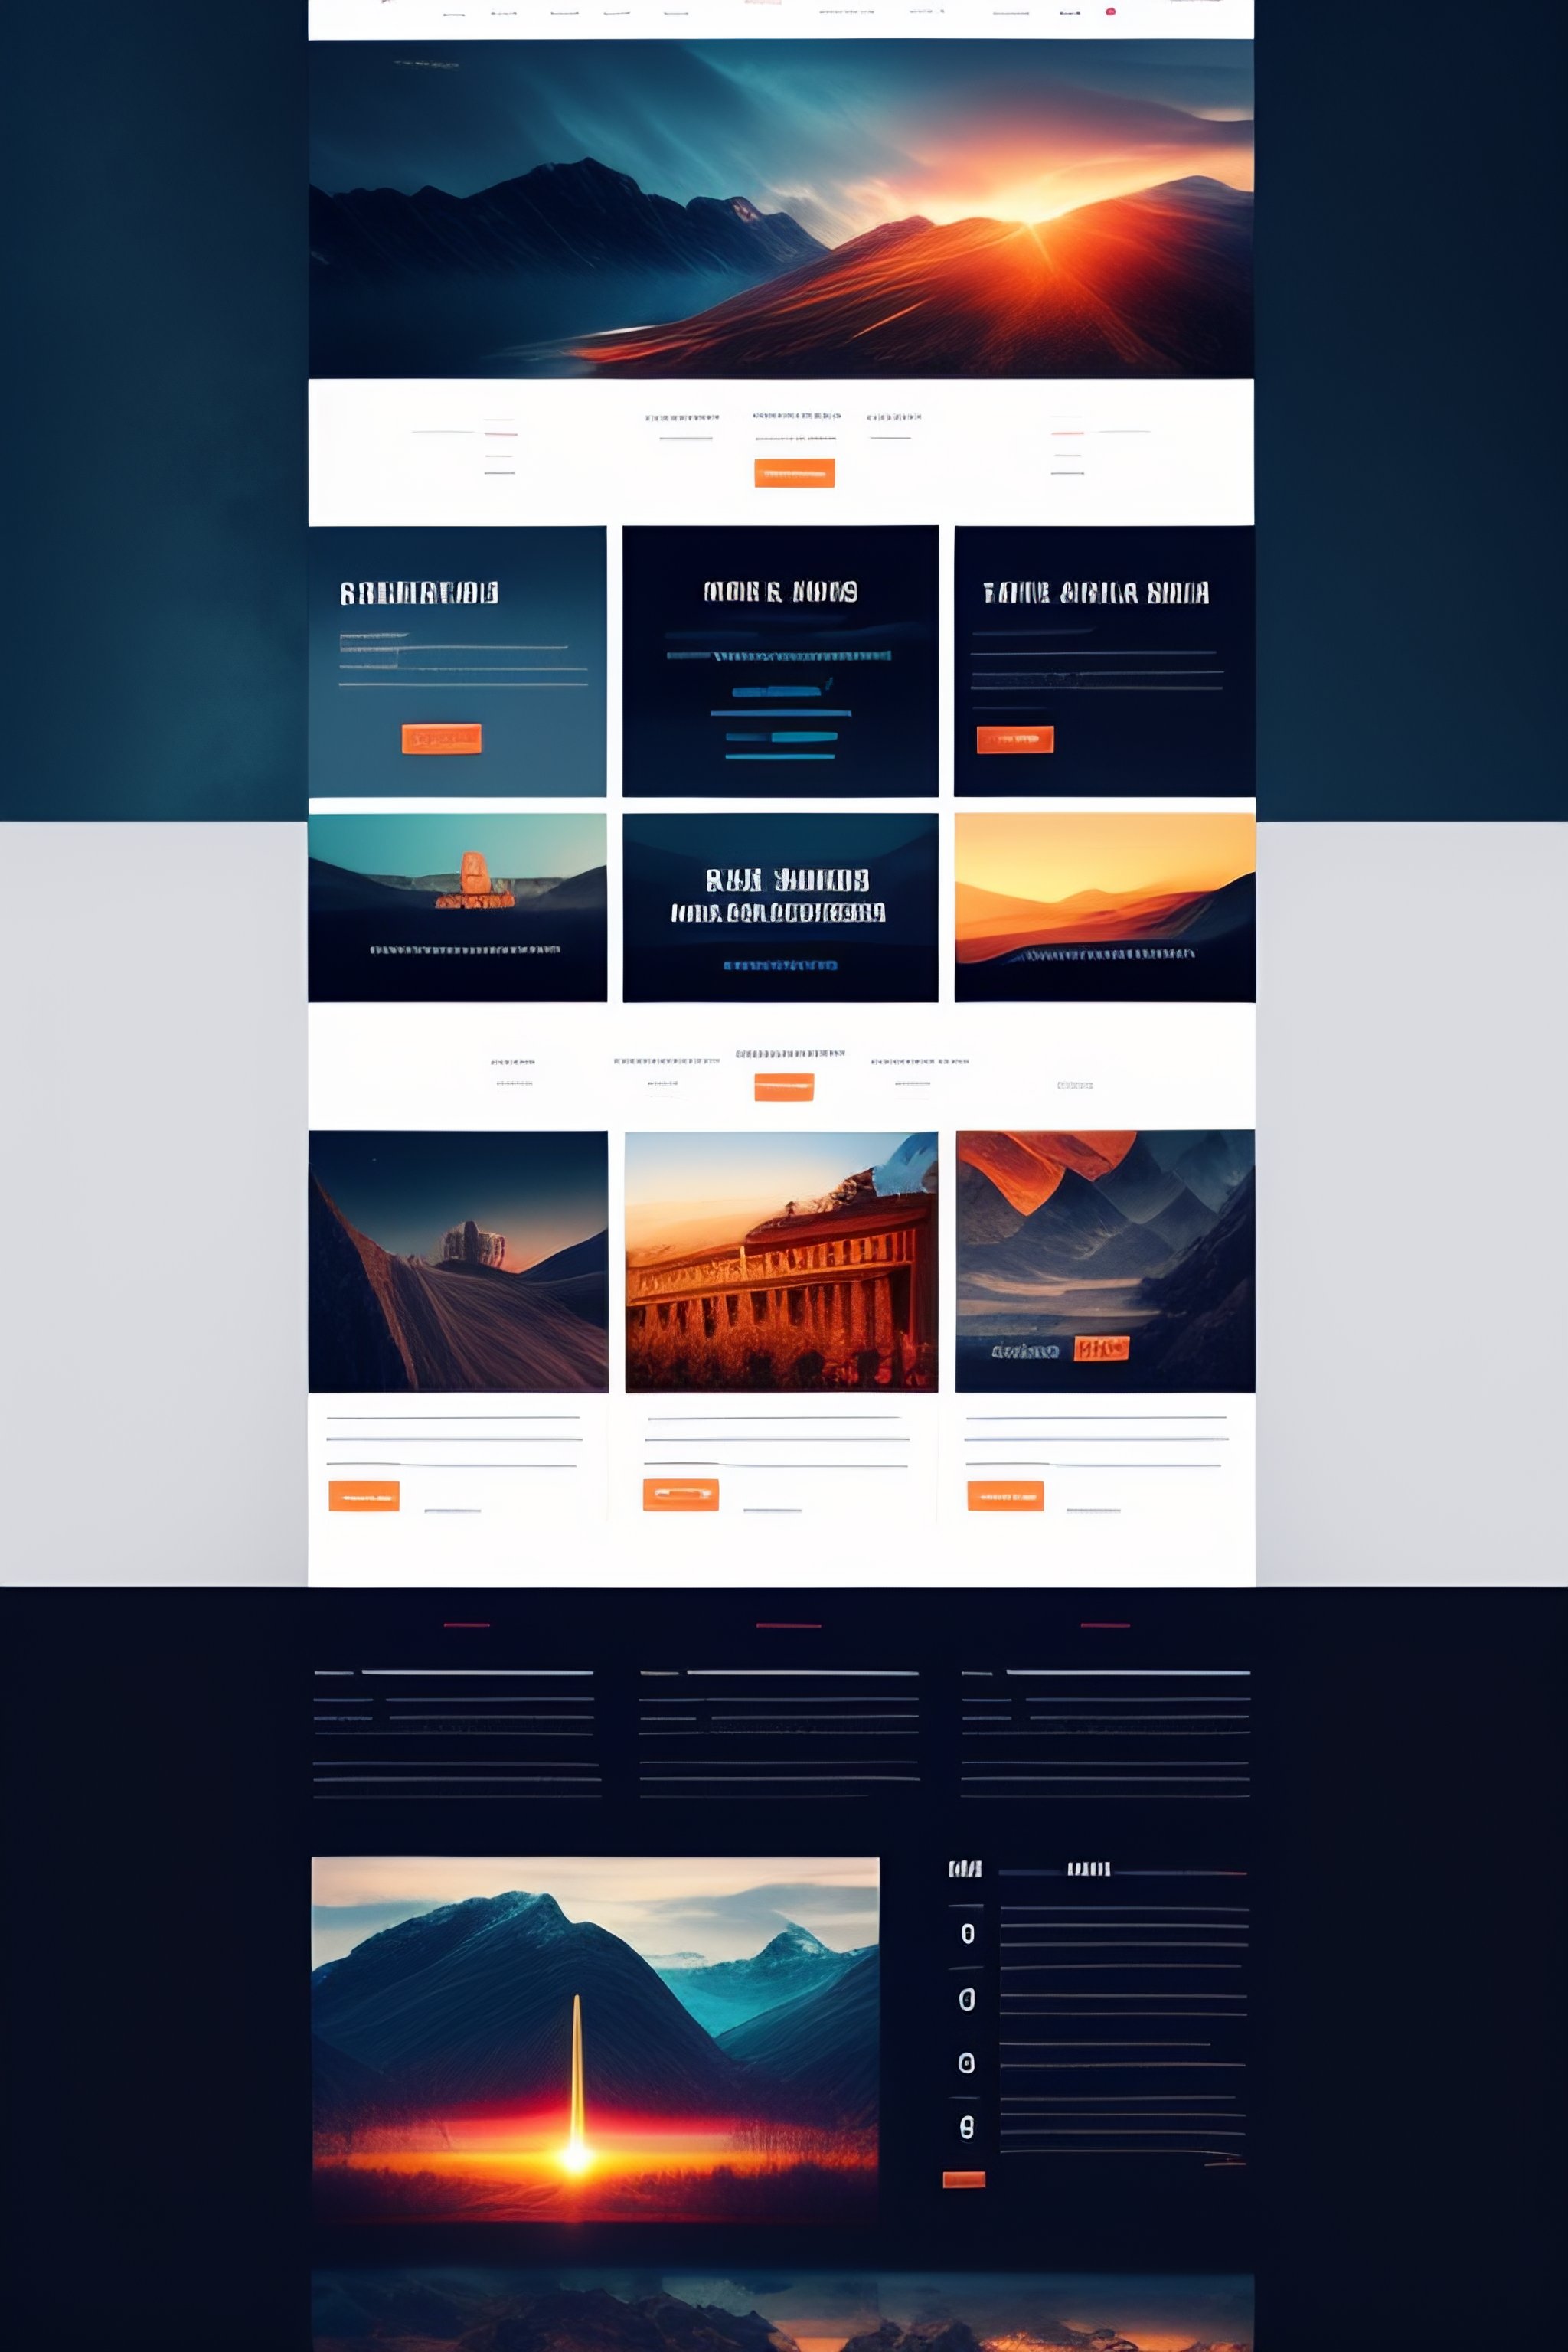 page builder for wordpress